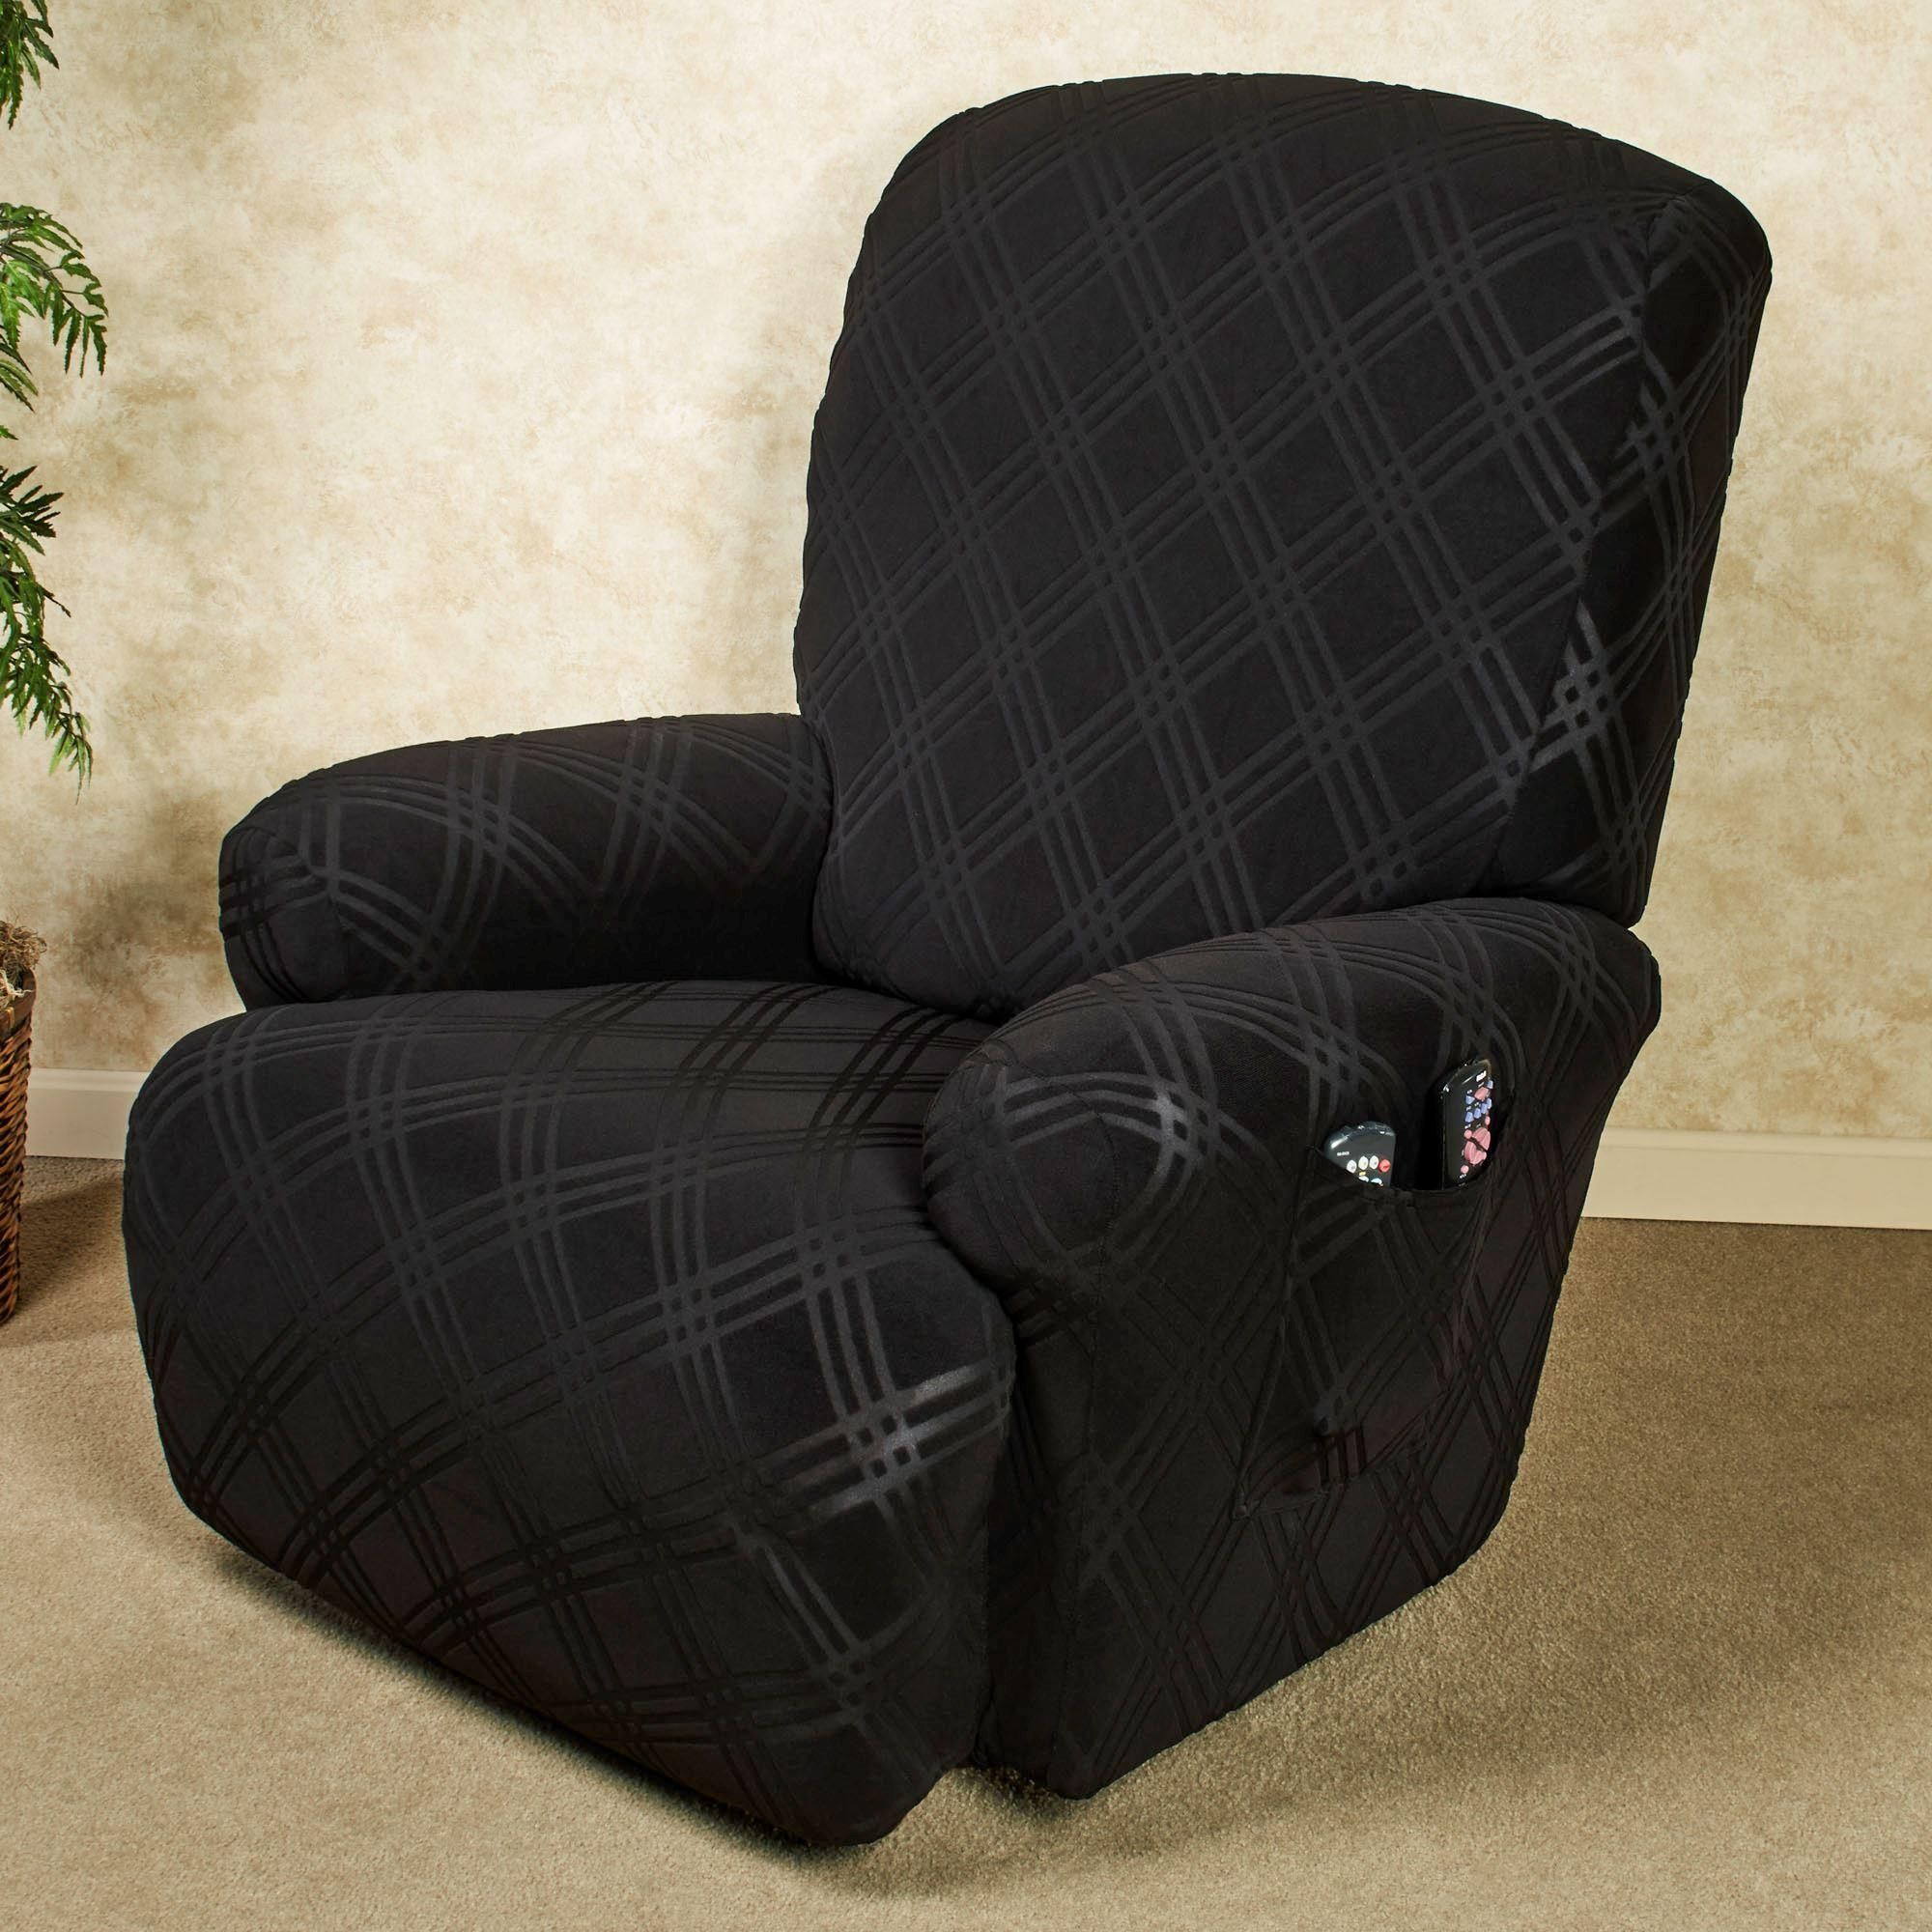 Double Diamond Stretch Jumbo Recliner Slipcovers Inside Stretch Covers For Recliners (View 3 of 20)